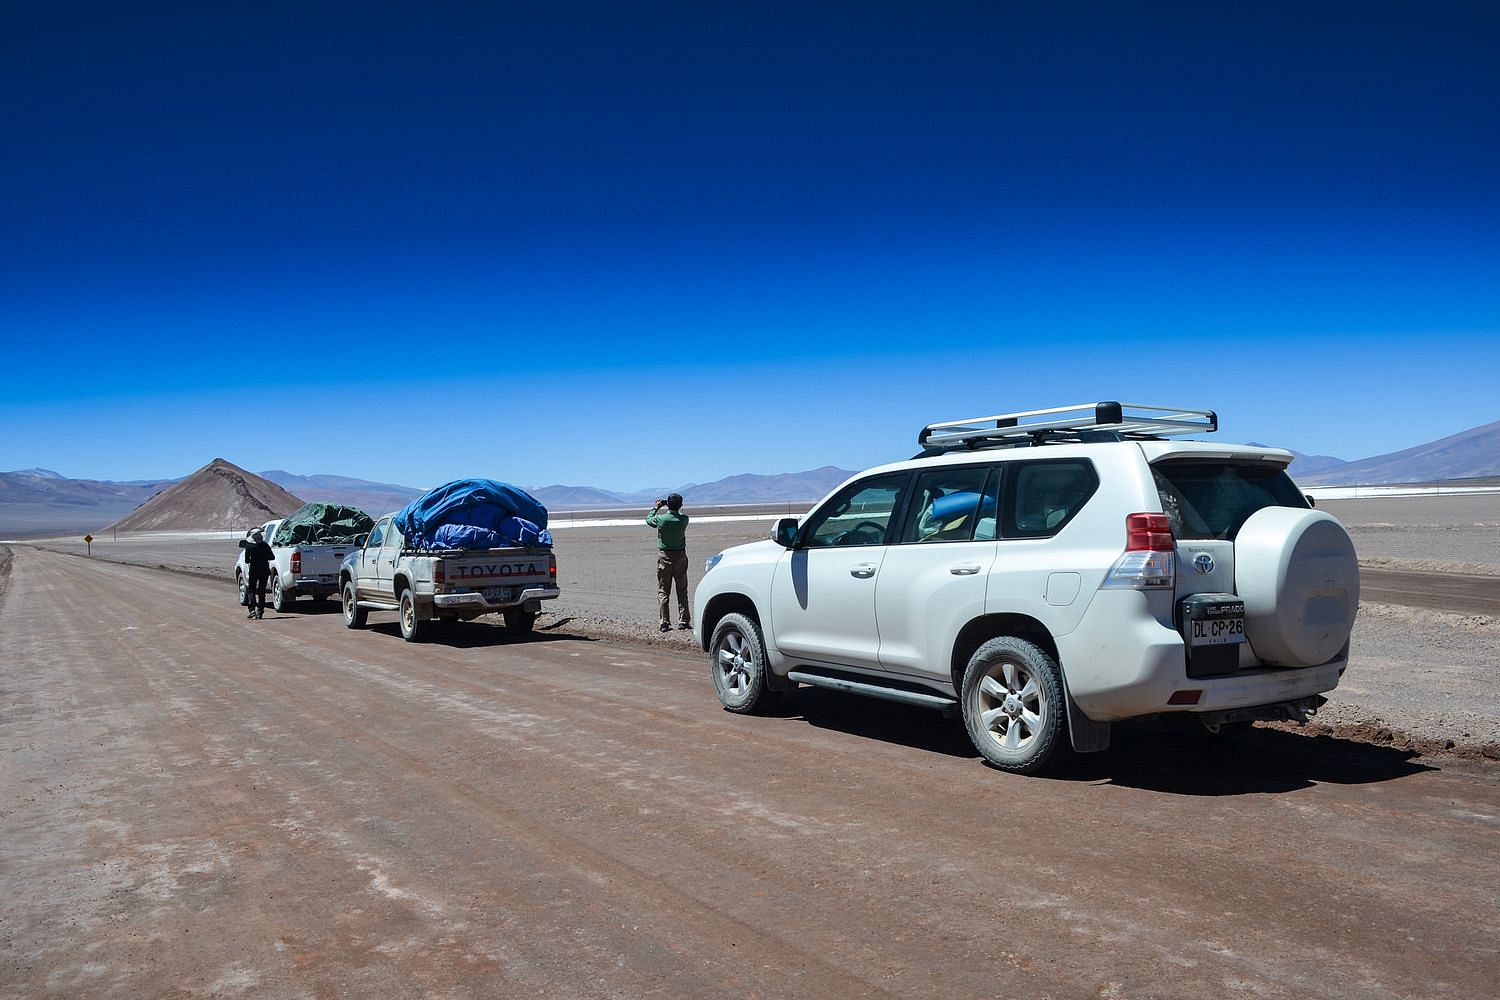 Team members and 4WD Vehicles on the way to the Ojos del Salado near Copiapo - Chile Montaña Expedition 2017.